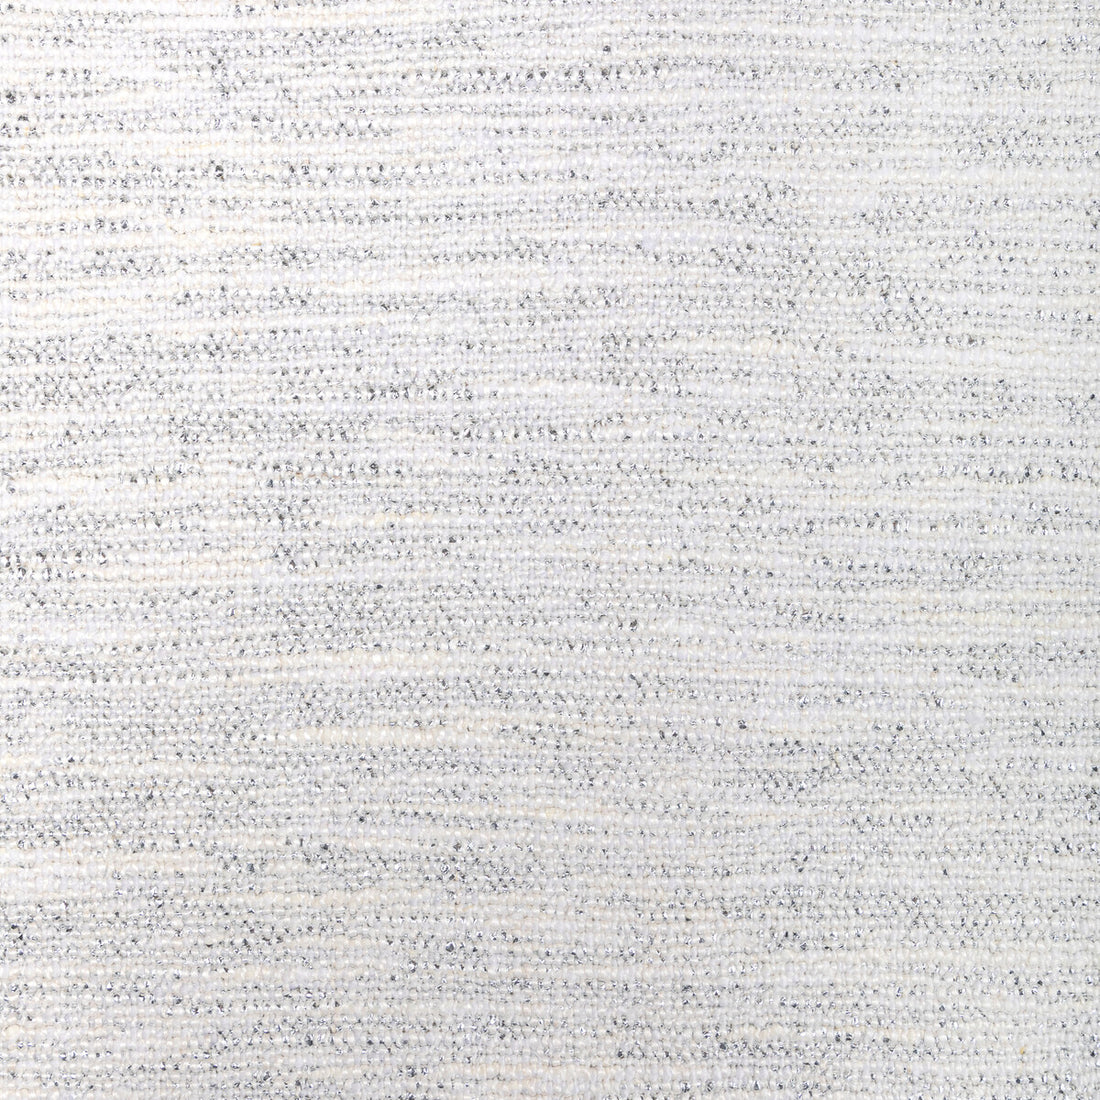 Heavy Metal fabric in ivory silver color - pattern 36328.11.0 - by Kravet Couture in the Modern Luxe III collection